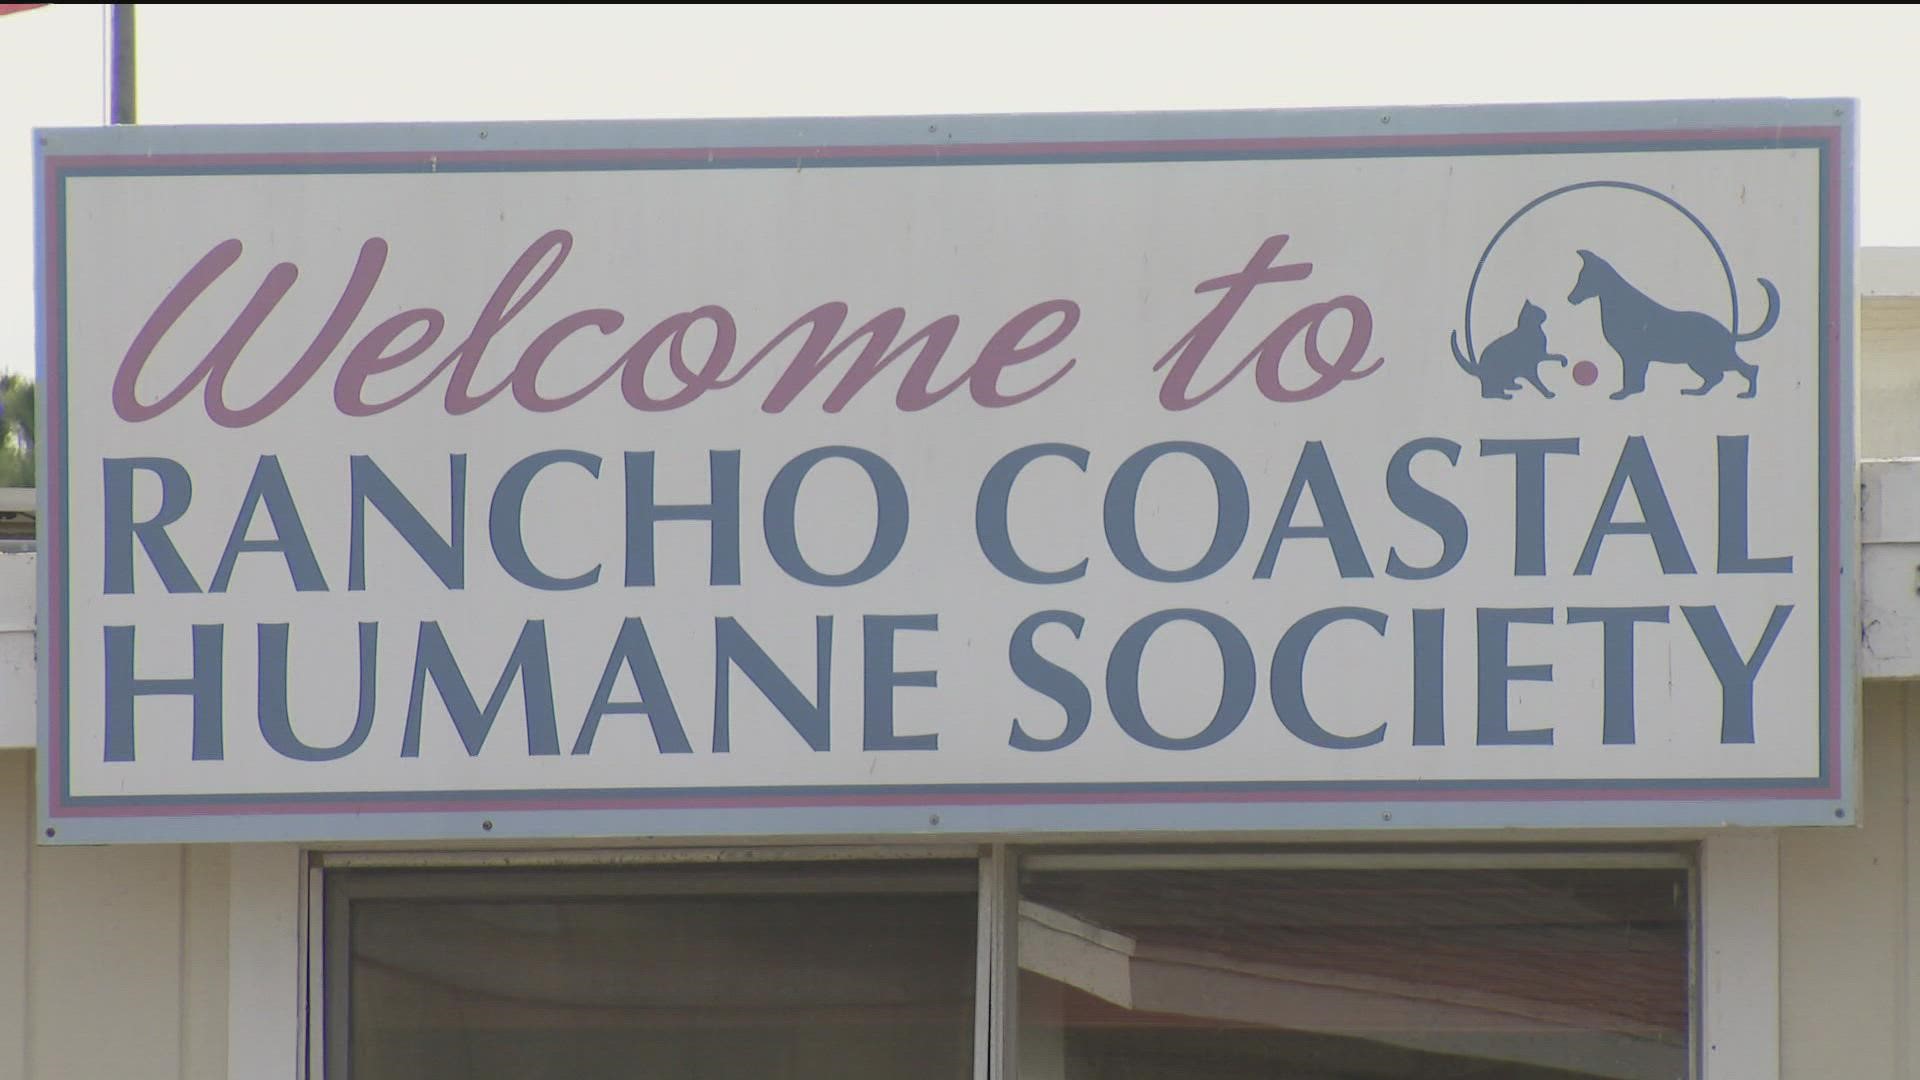 Rancho Coastal Humane Society in San Diego County is expanding, adding more space for adoptable animals.